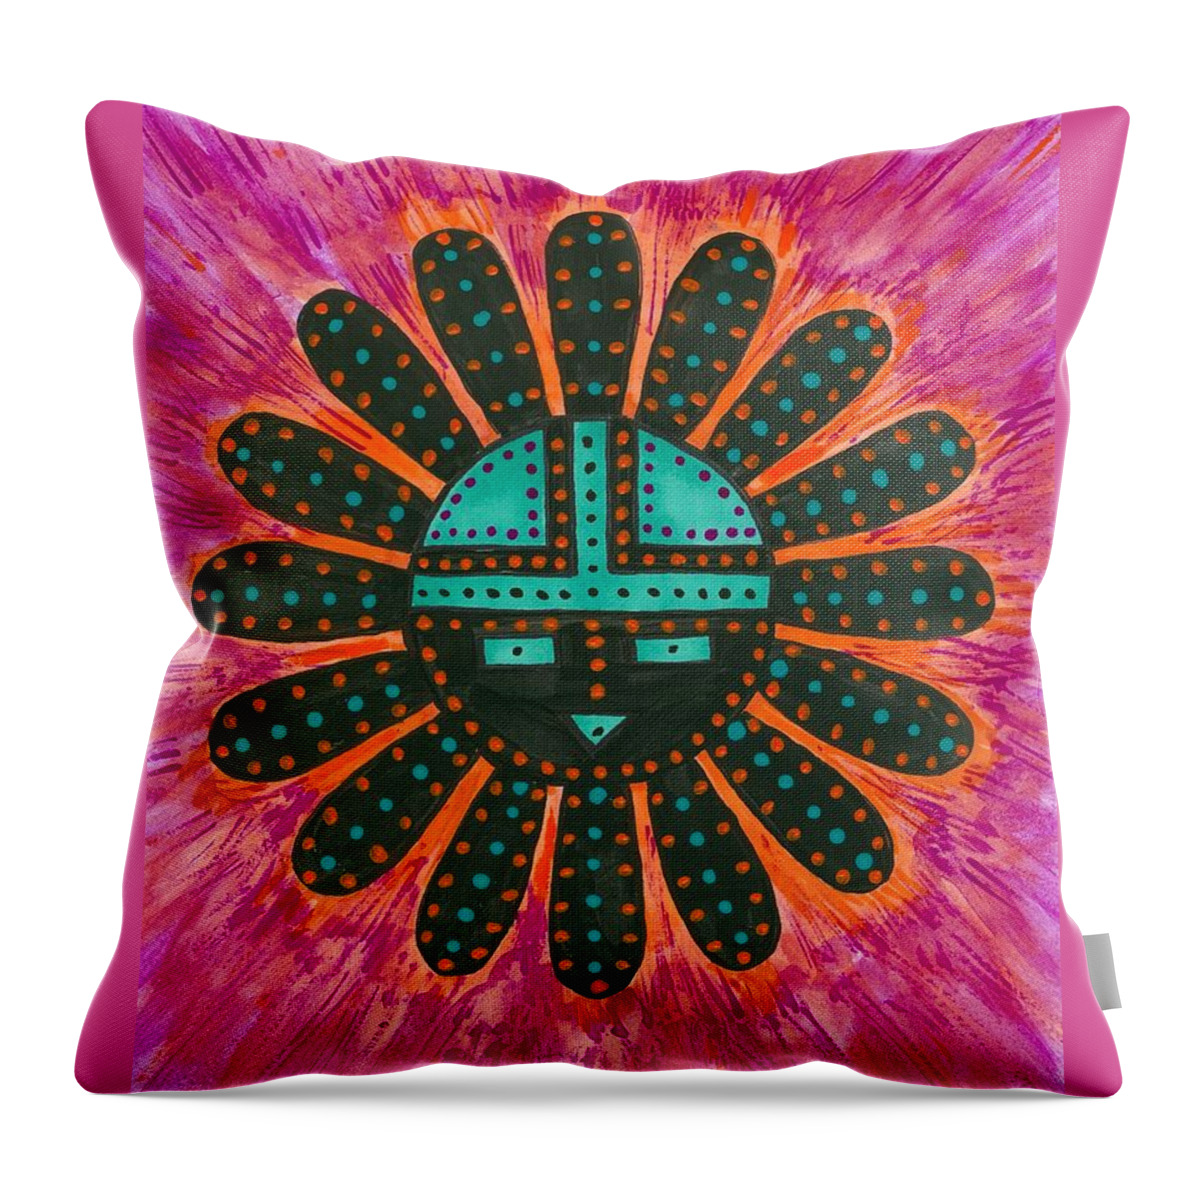 Sunface Throw Pillow featuring the painting Southwest Sunburst Sunface by Susie Weber